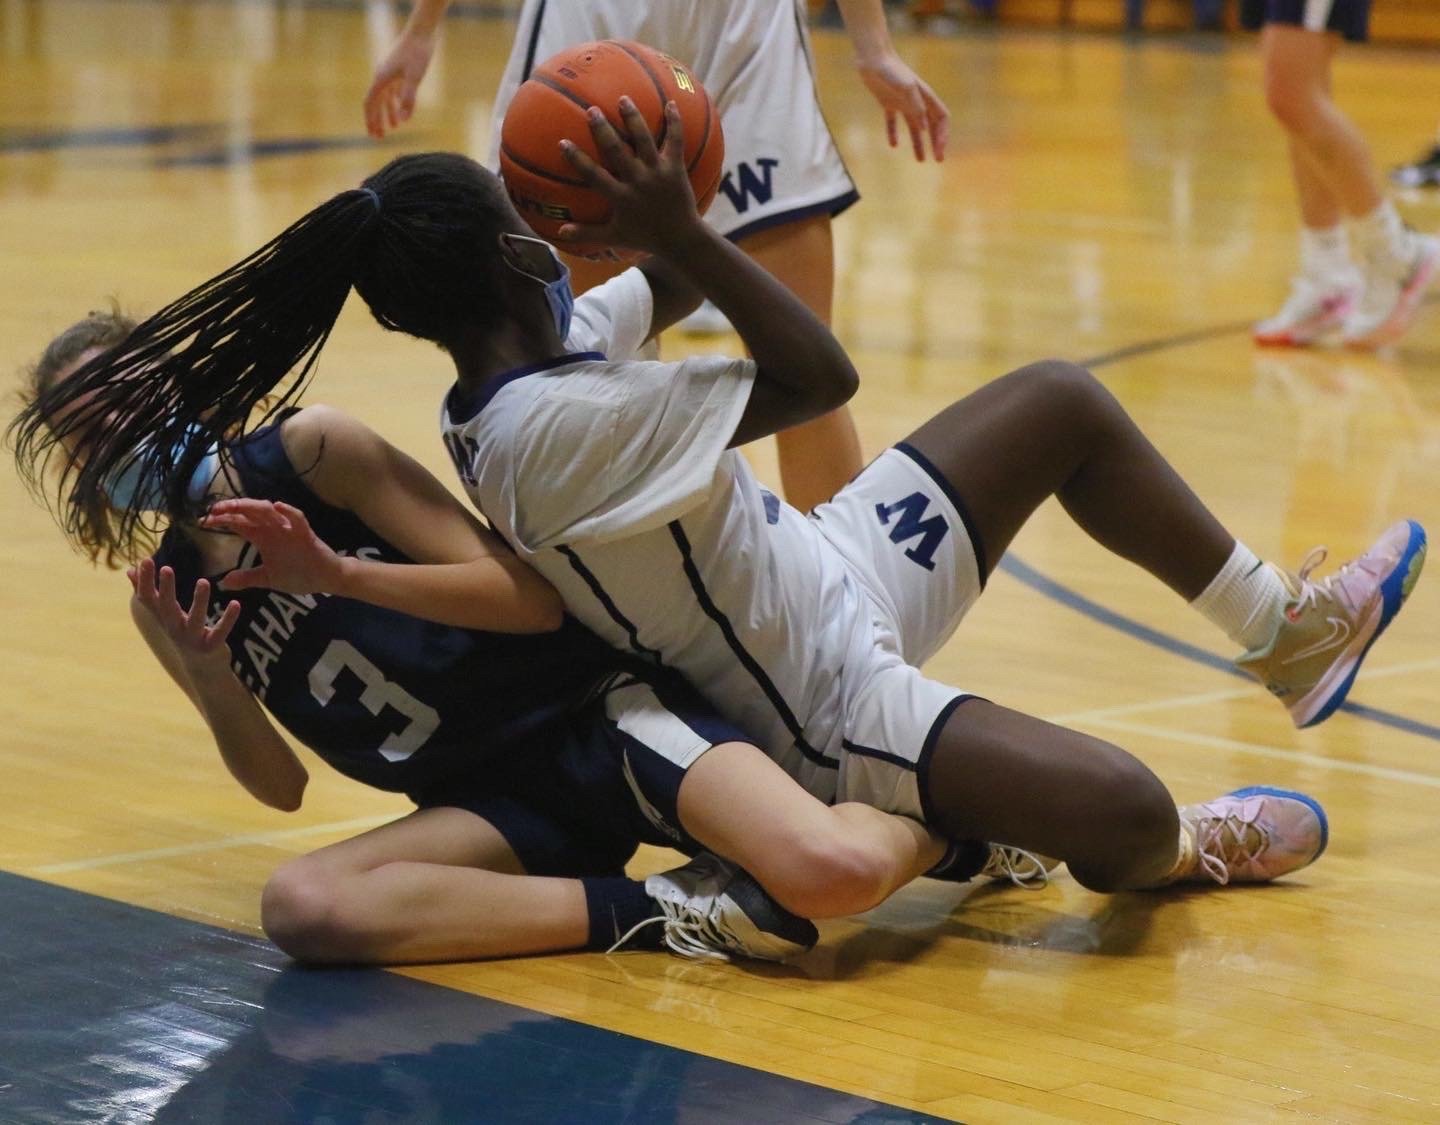 Ciara Barnett fights for the ball against Cape Cod Academy on Tuesday. The girls lost the game 57-32.